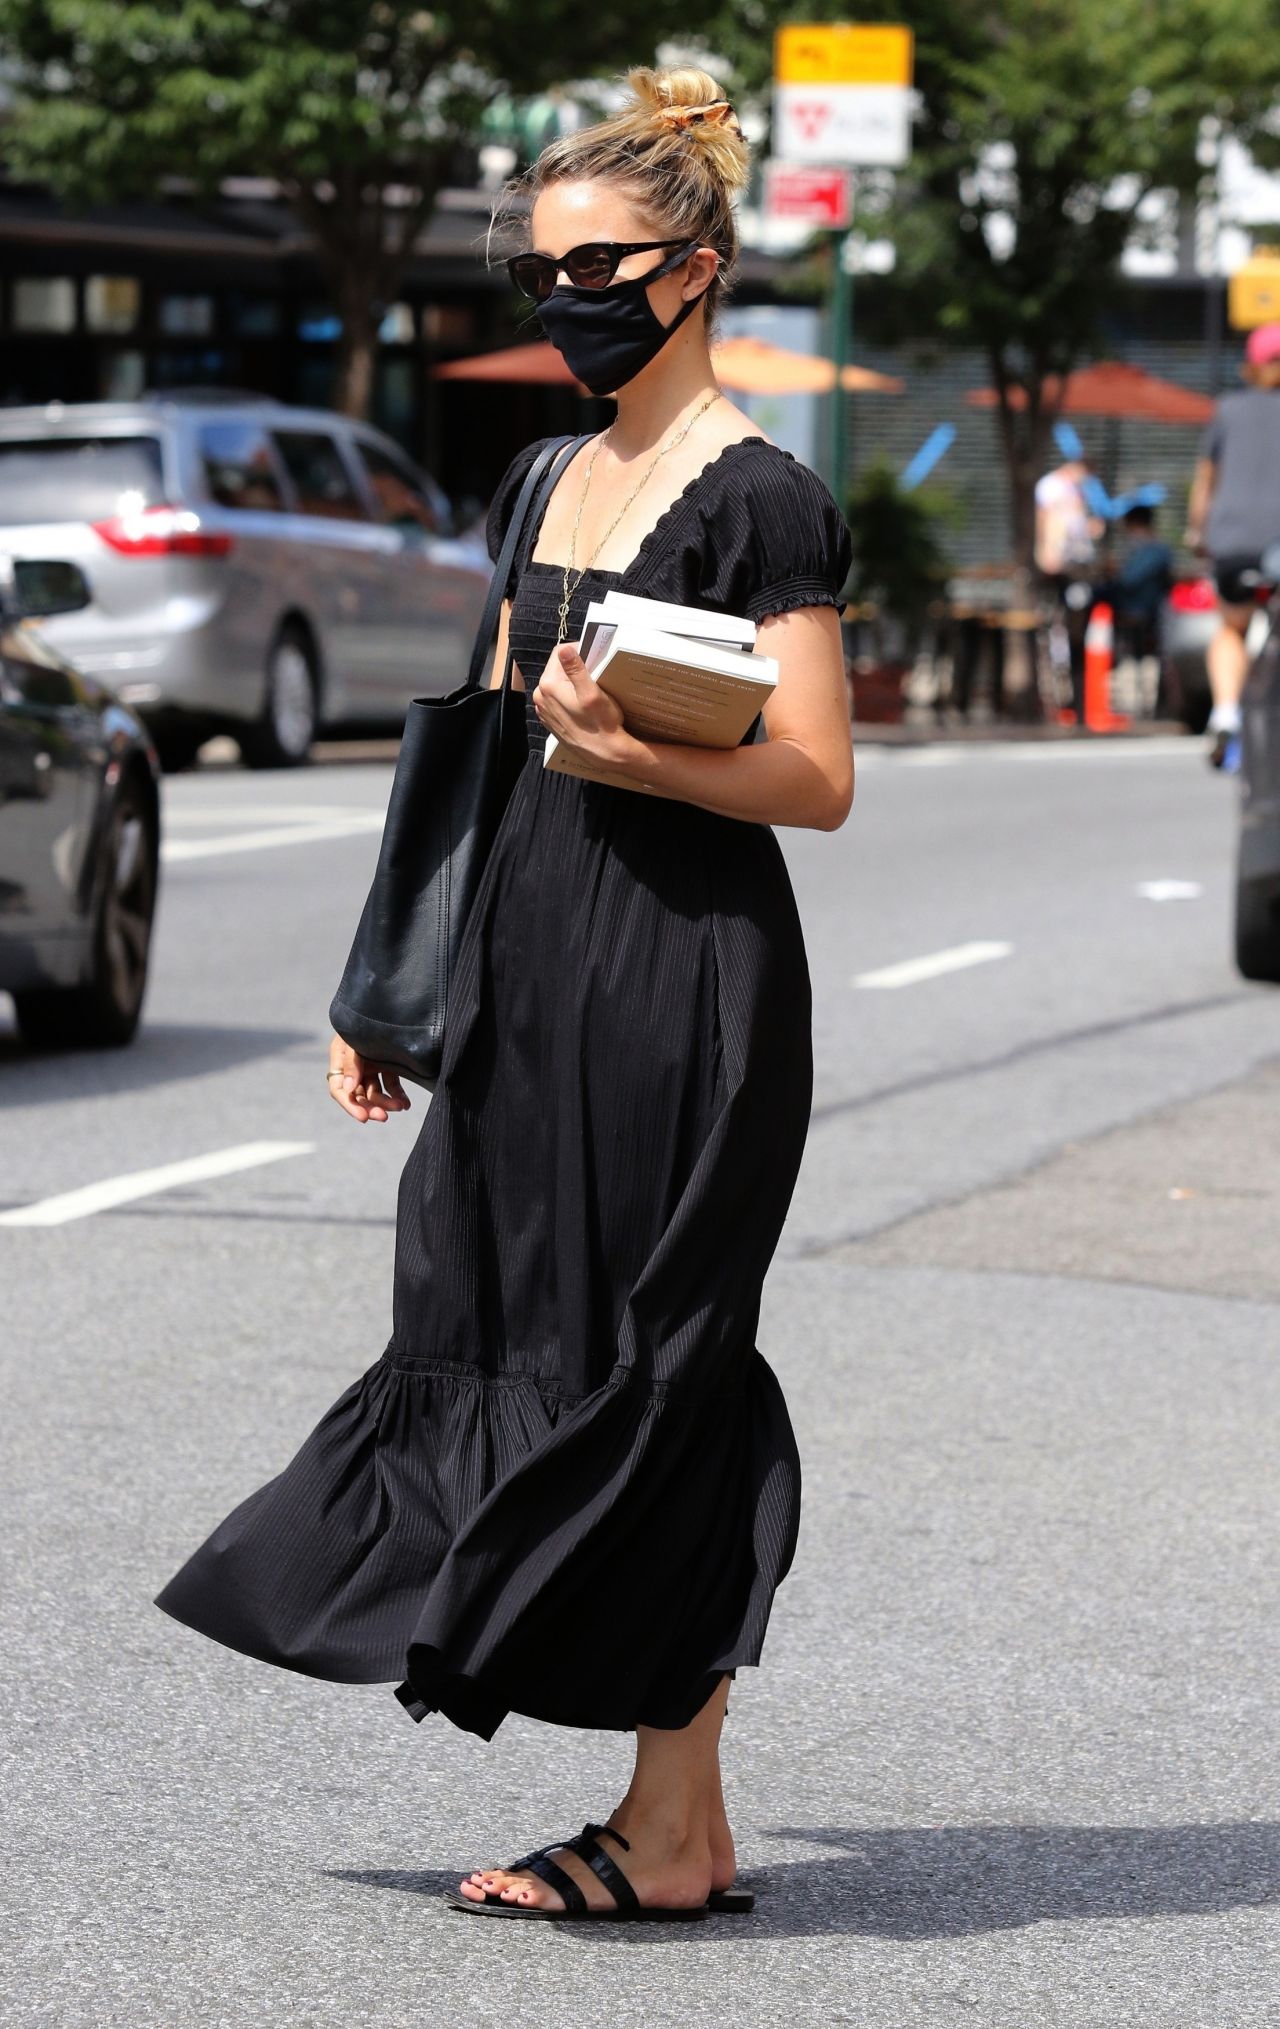 dianna-agron-out-in-nyc-08-26-2020-0.jpg